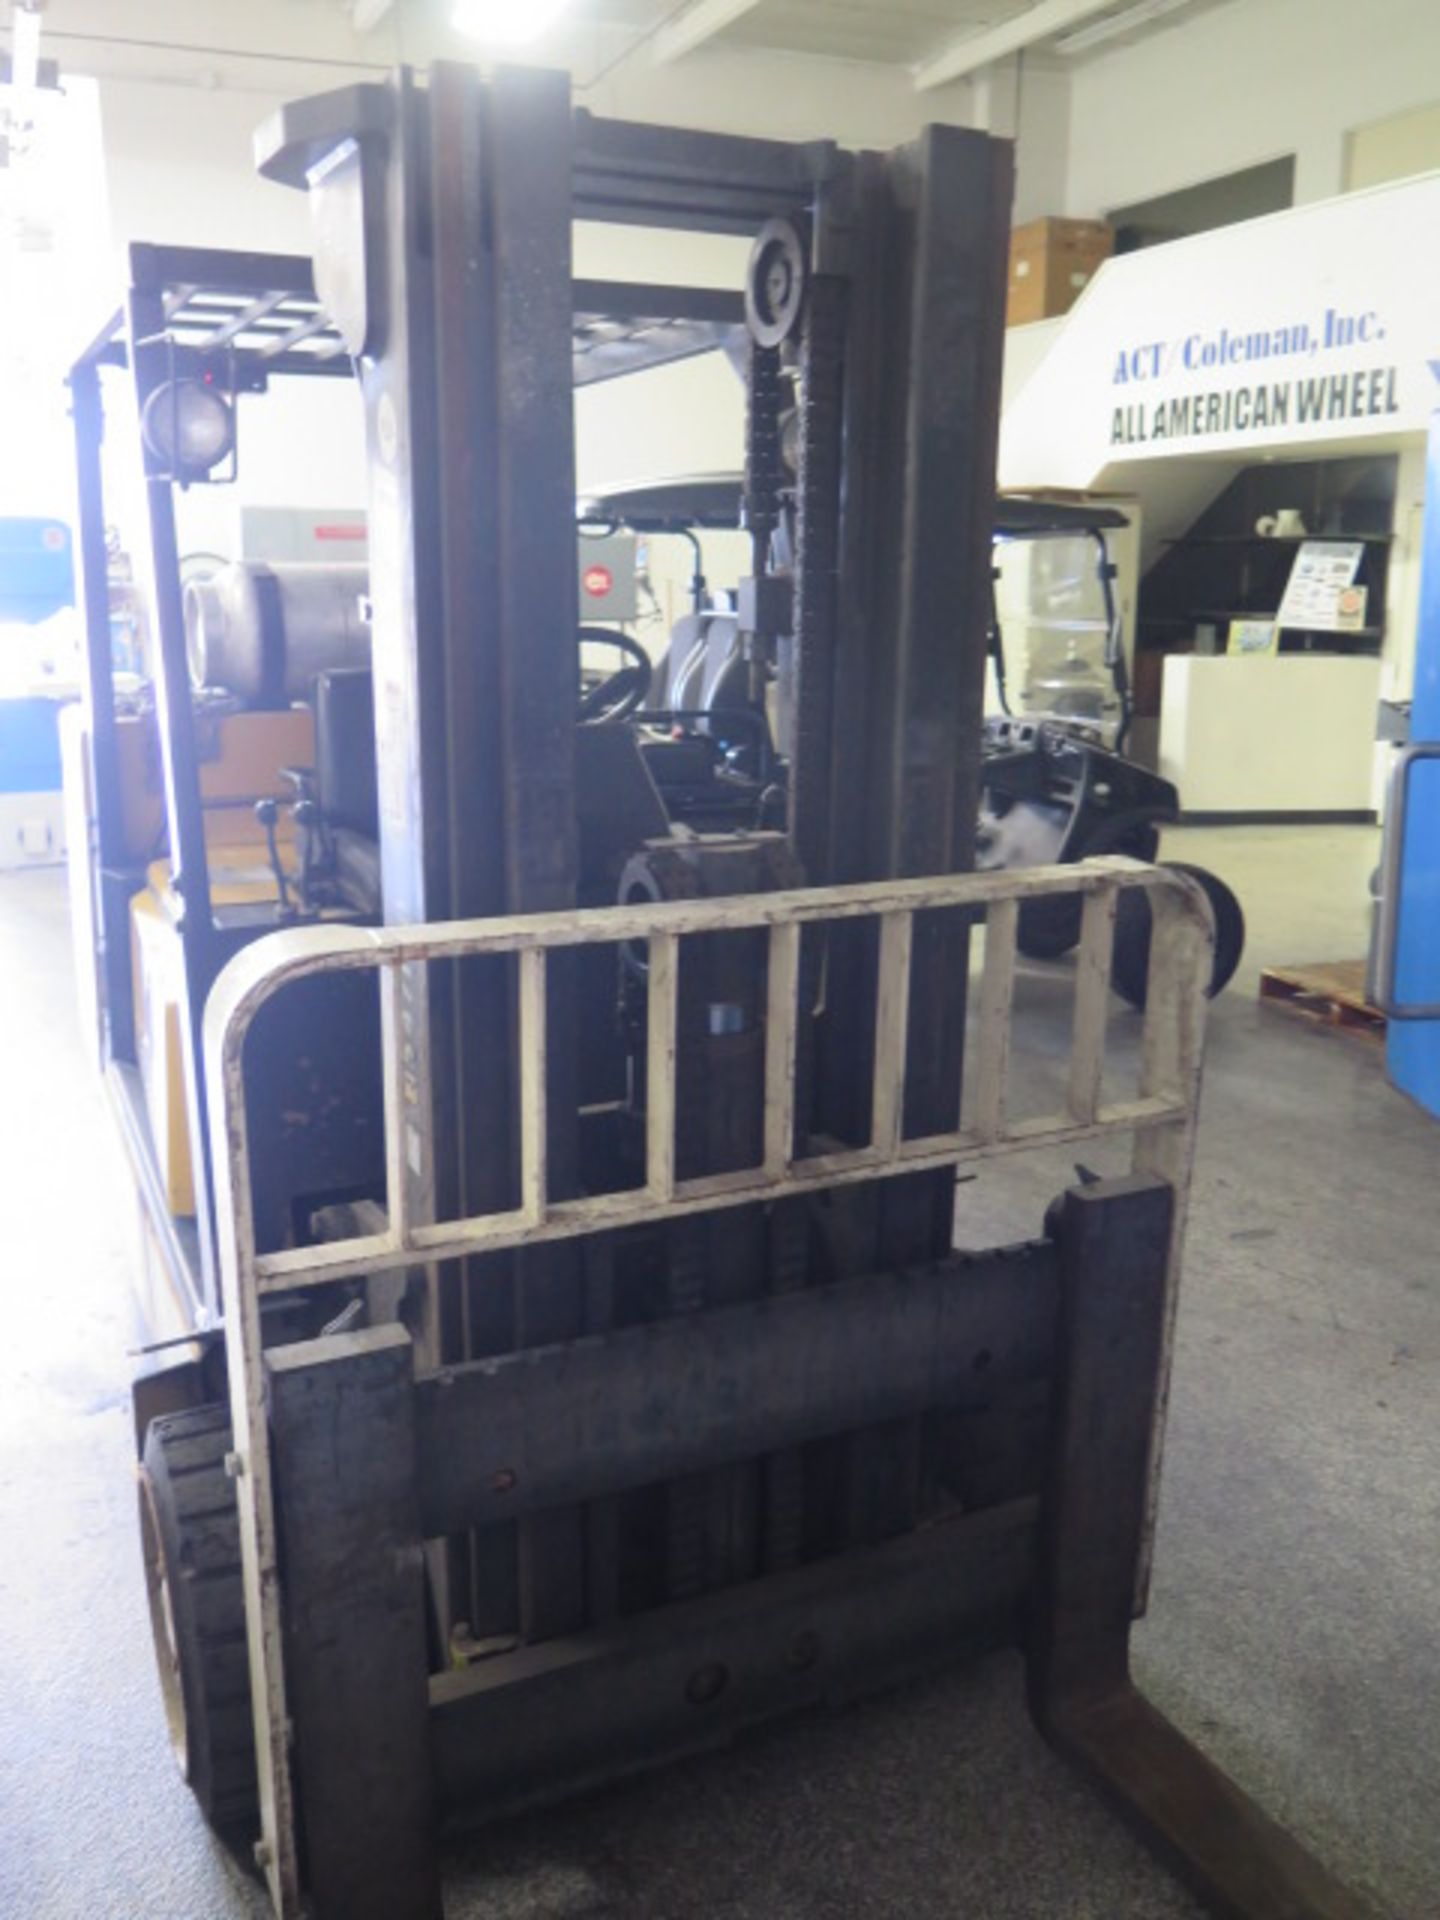 Yale GLC120MFNSAE085 12,000 Lb Cap LPG Forklift s/n N547180 w/ 3-Stage Mast, 170” Lift Height, Solid - Image 9 of 14